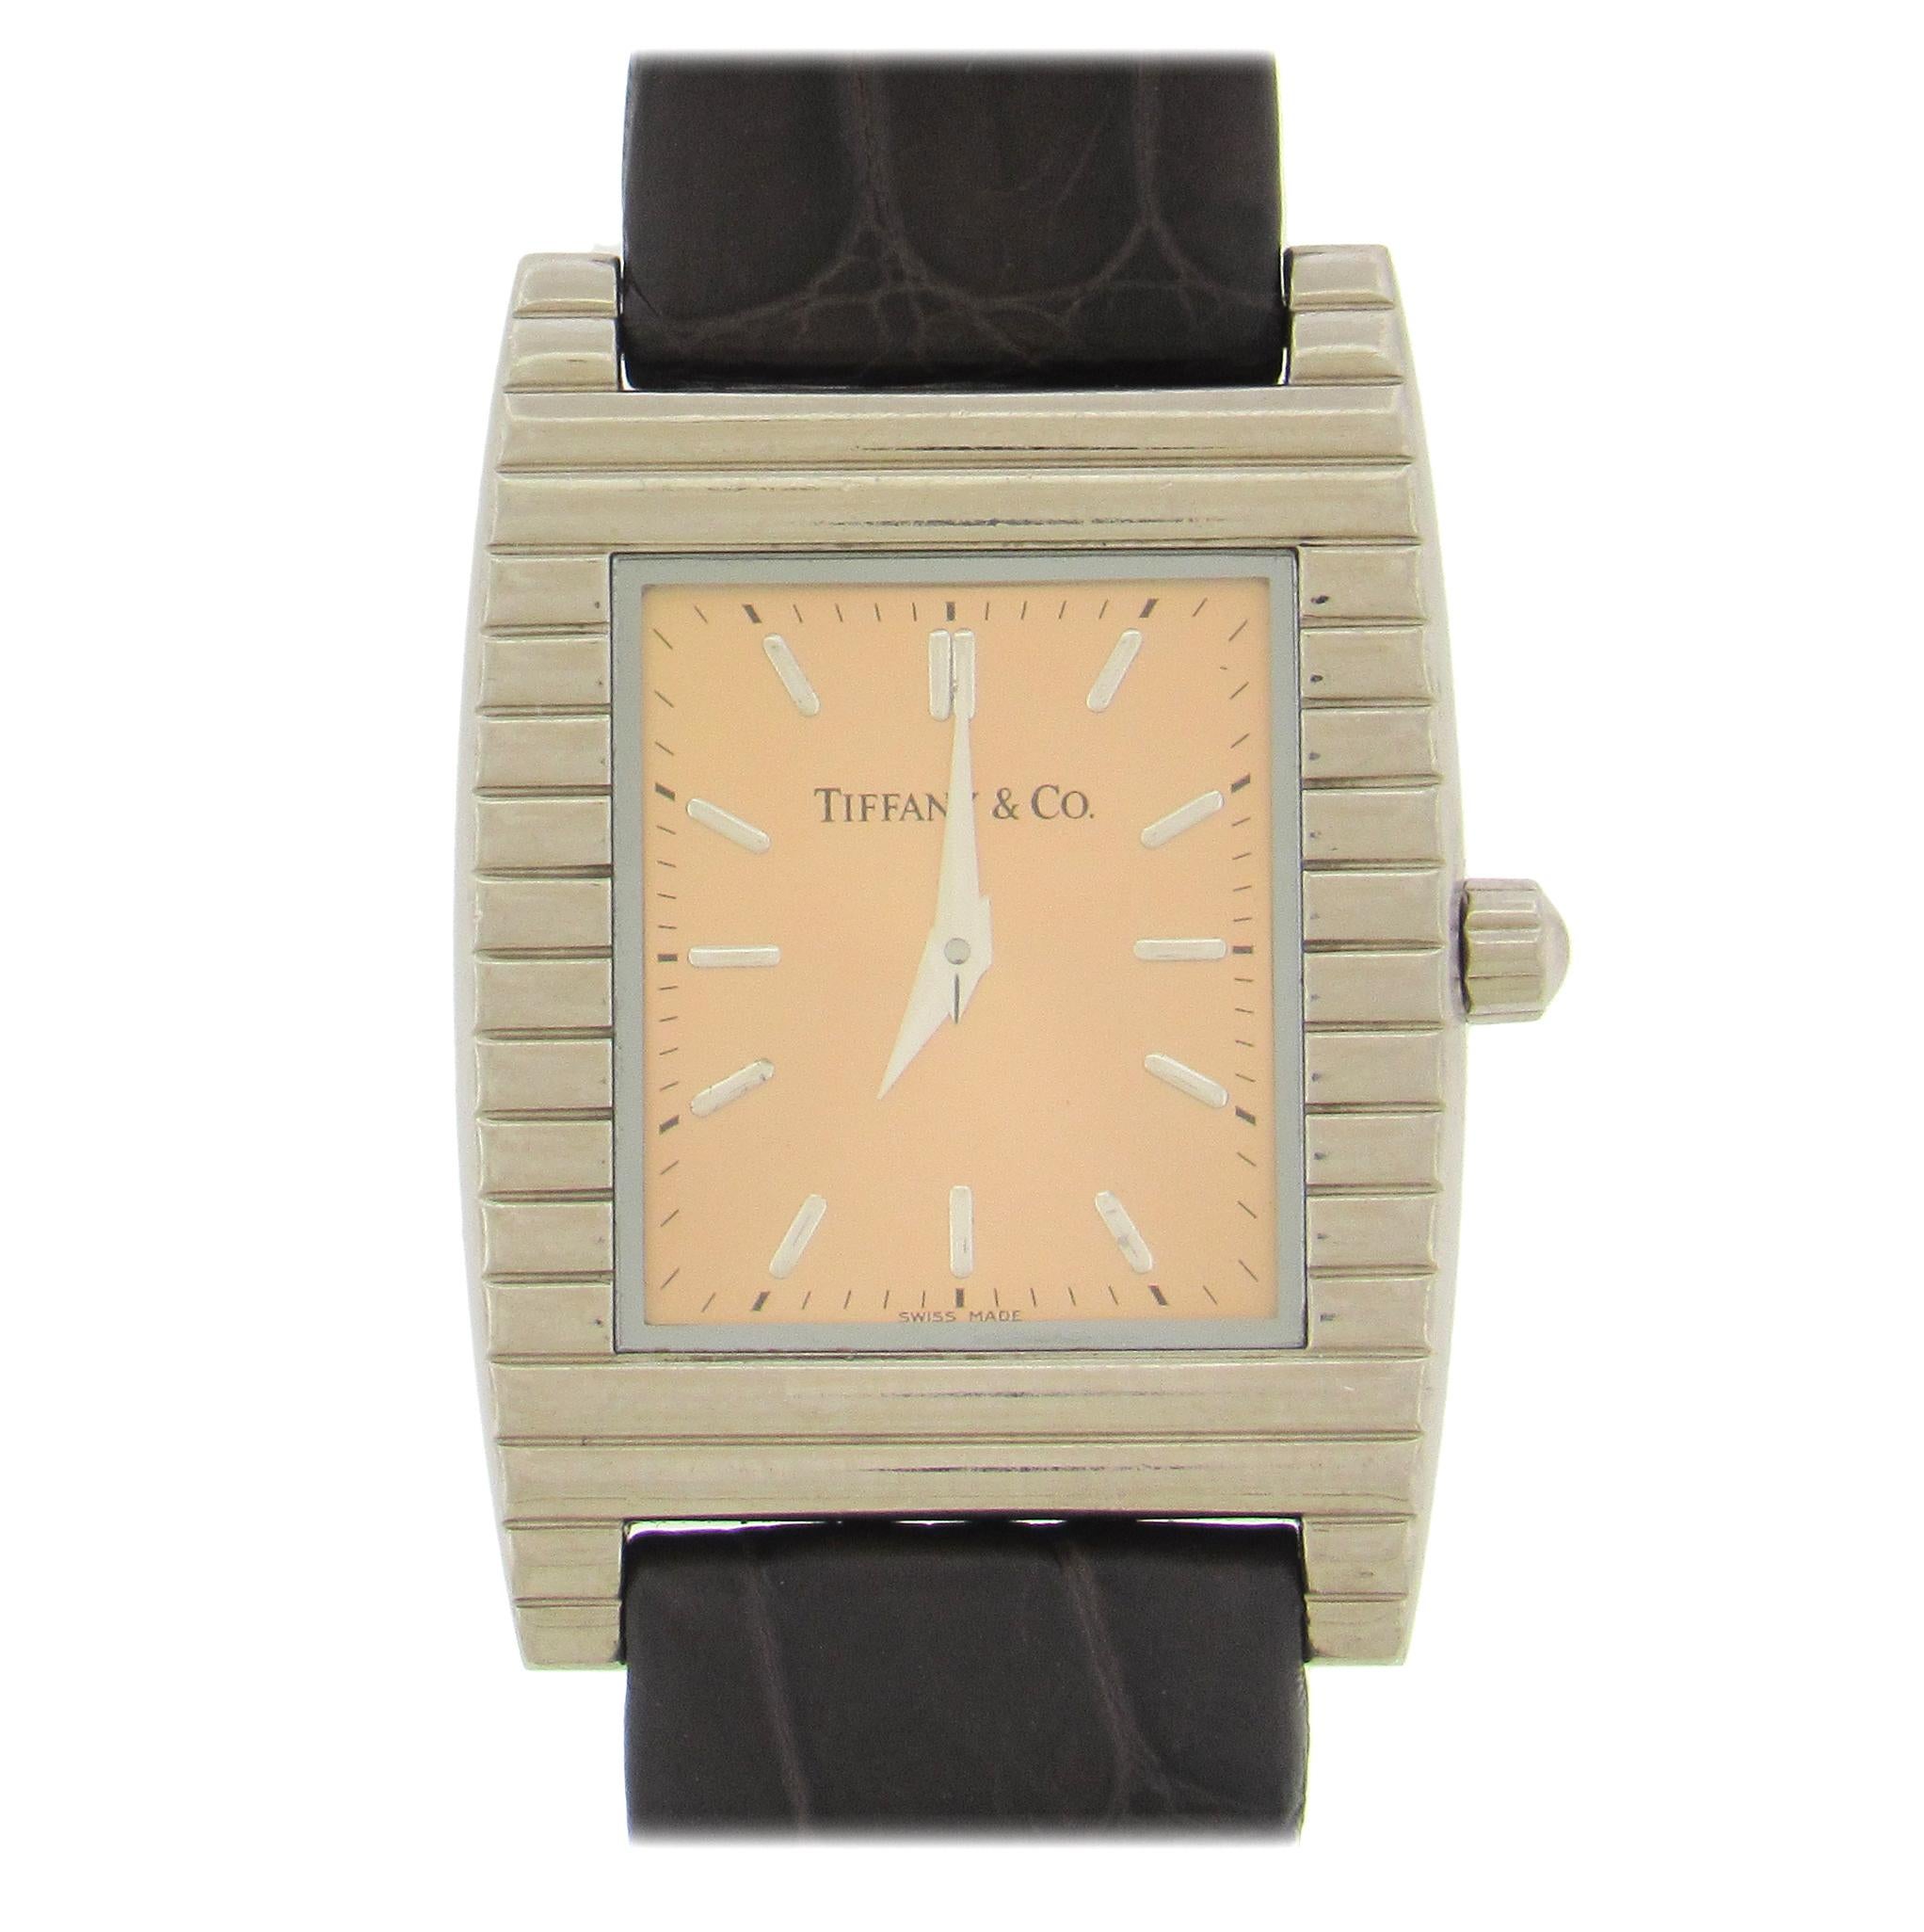 Elegant 18K white gold Tiffany quartz wristwatch, circa 2000, has a 28mm x 39mm case with snapback, stylized corrugated bezel, with matching Tiffan 18K buckle, salmon dial with applied white gold hour markers and dauphine hands. Quartz movement.